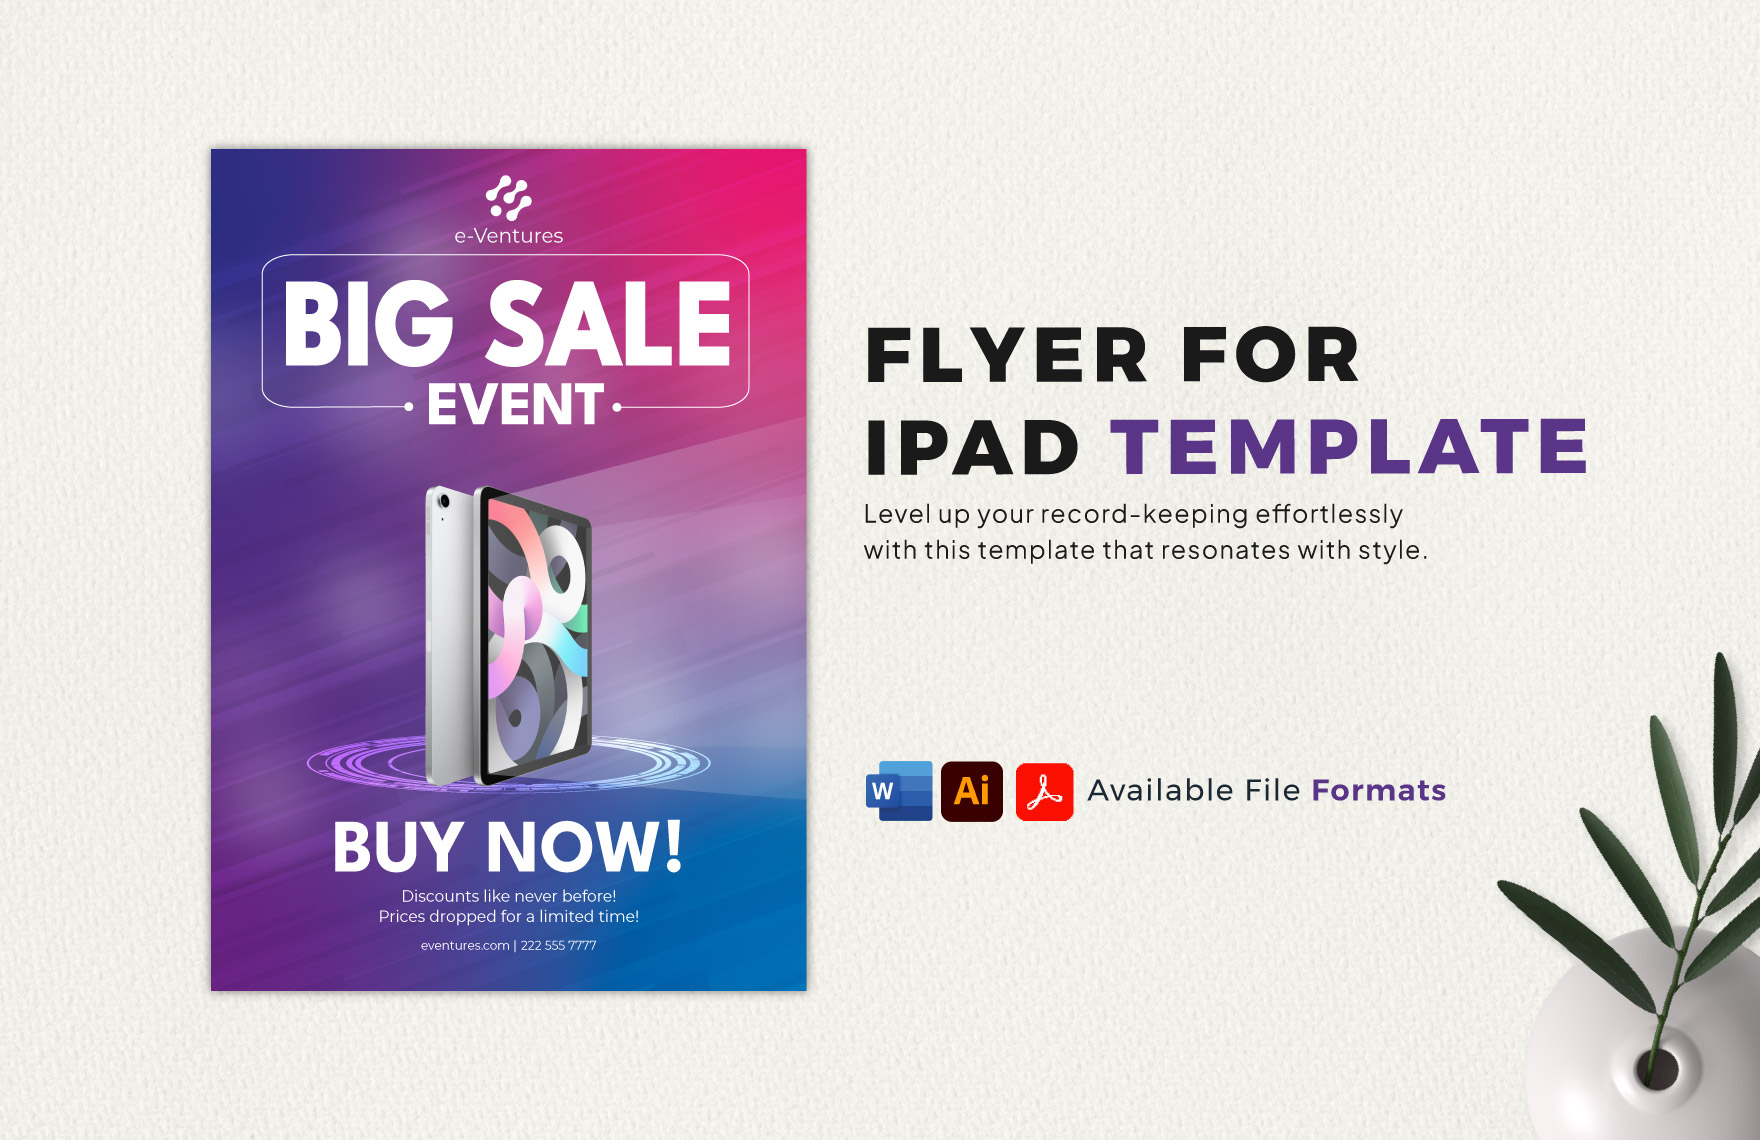 Flyer for iPad Template